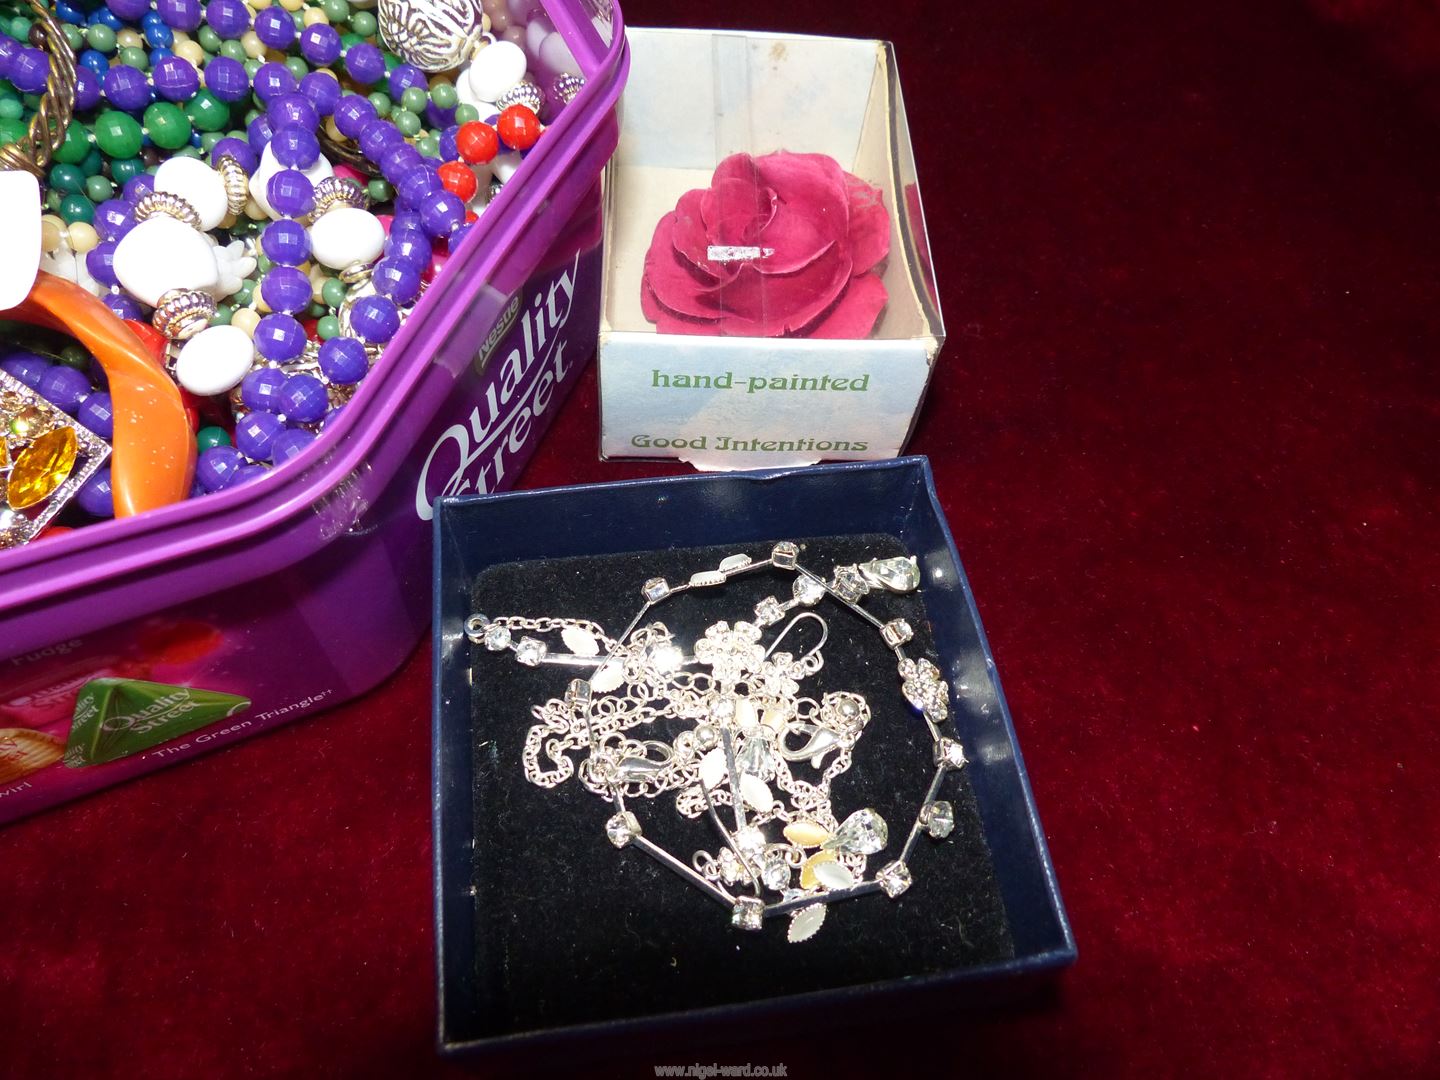 A quantity of costume jewellery including beads, bangles, brooches, necklaces, earrings, etc. - Image 4 of 4